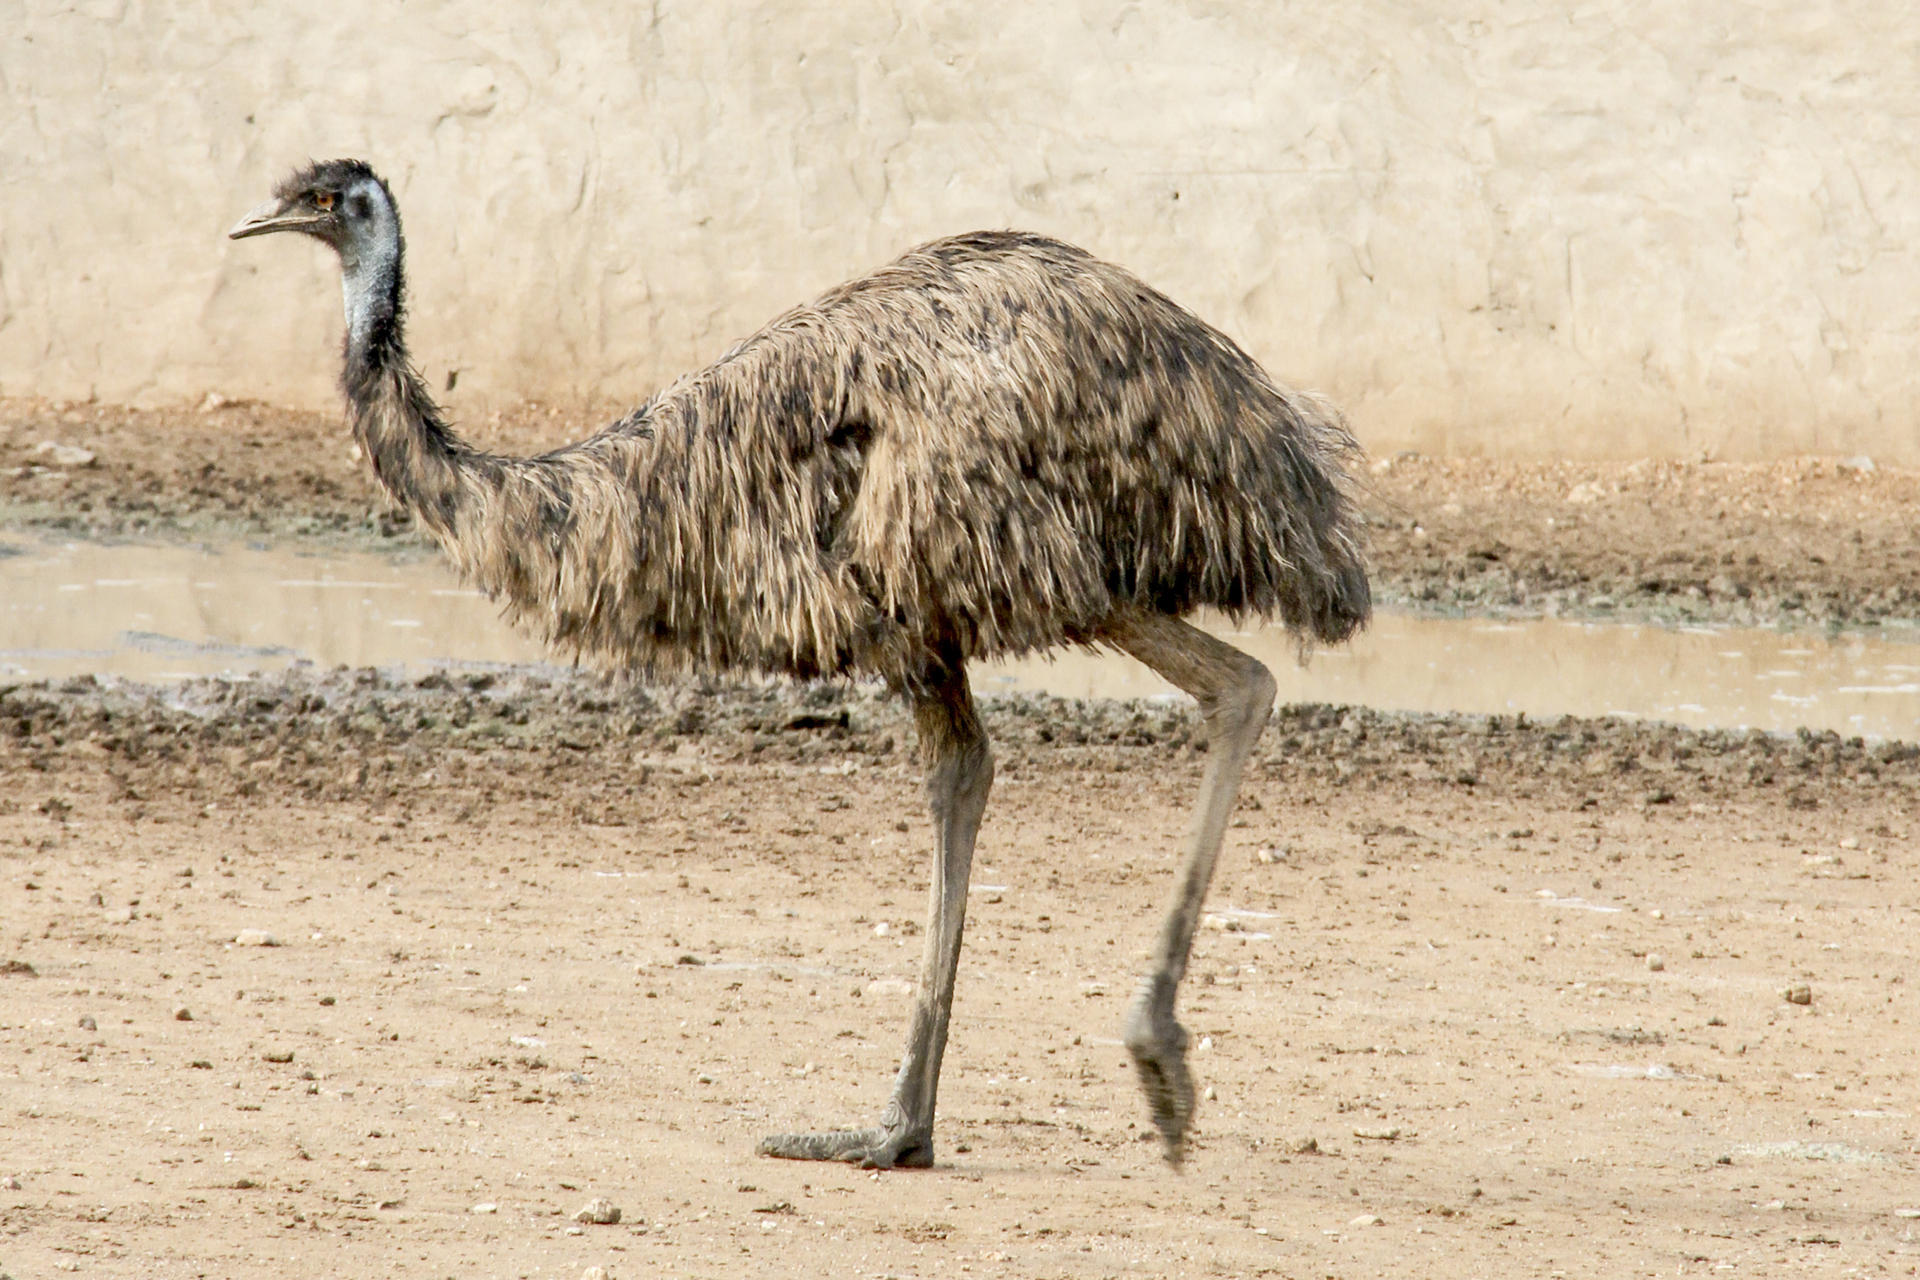 Emu oil has long been used to treat chronic pain and skin conditions.